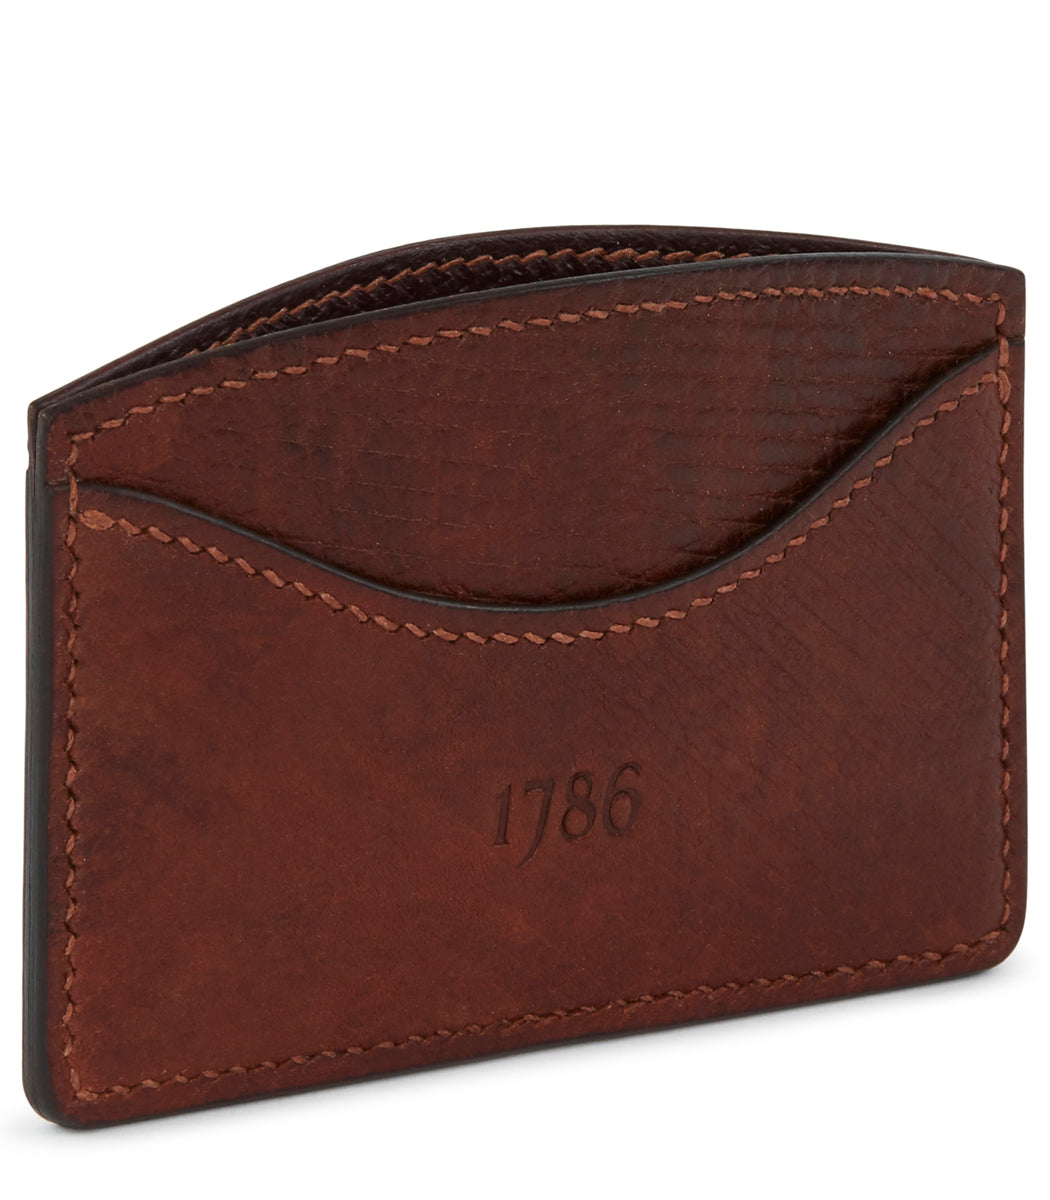 Russia Leather Credit Card Holder In Brown